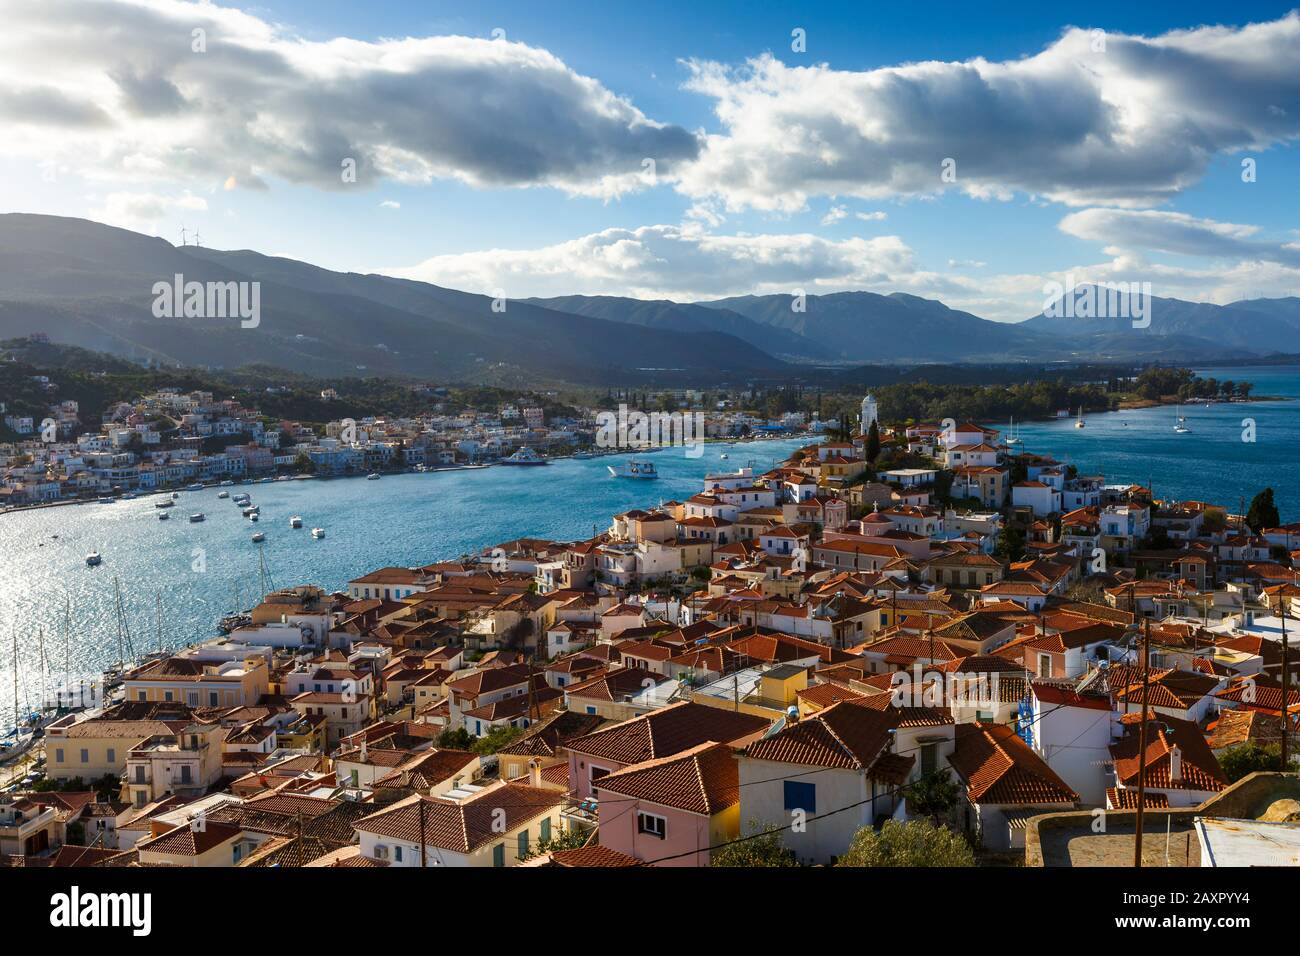 View of the Chora village of Poros island and Galatas village in Peloponnese from a nearby hill, Greece. Stock Photo